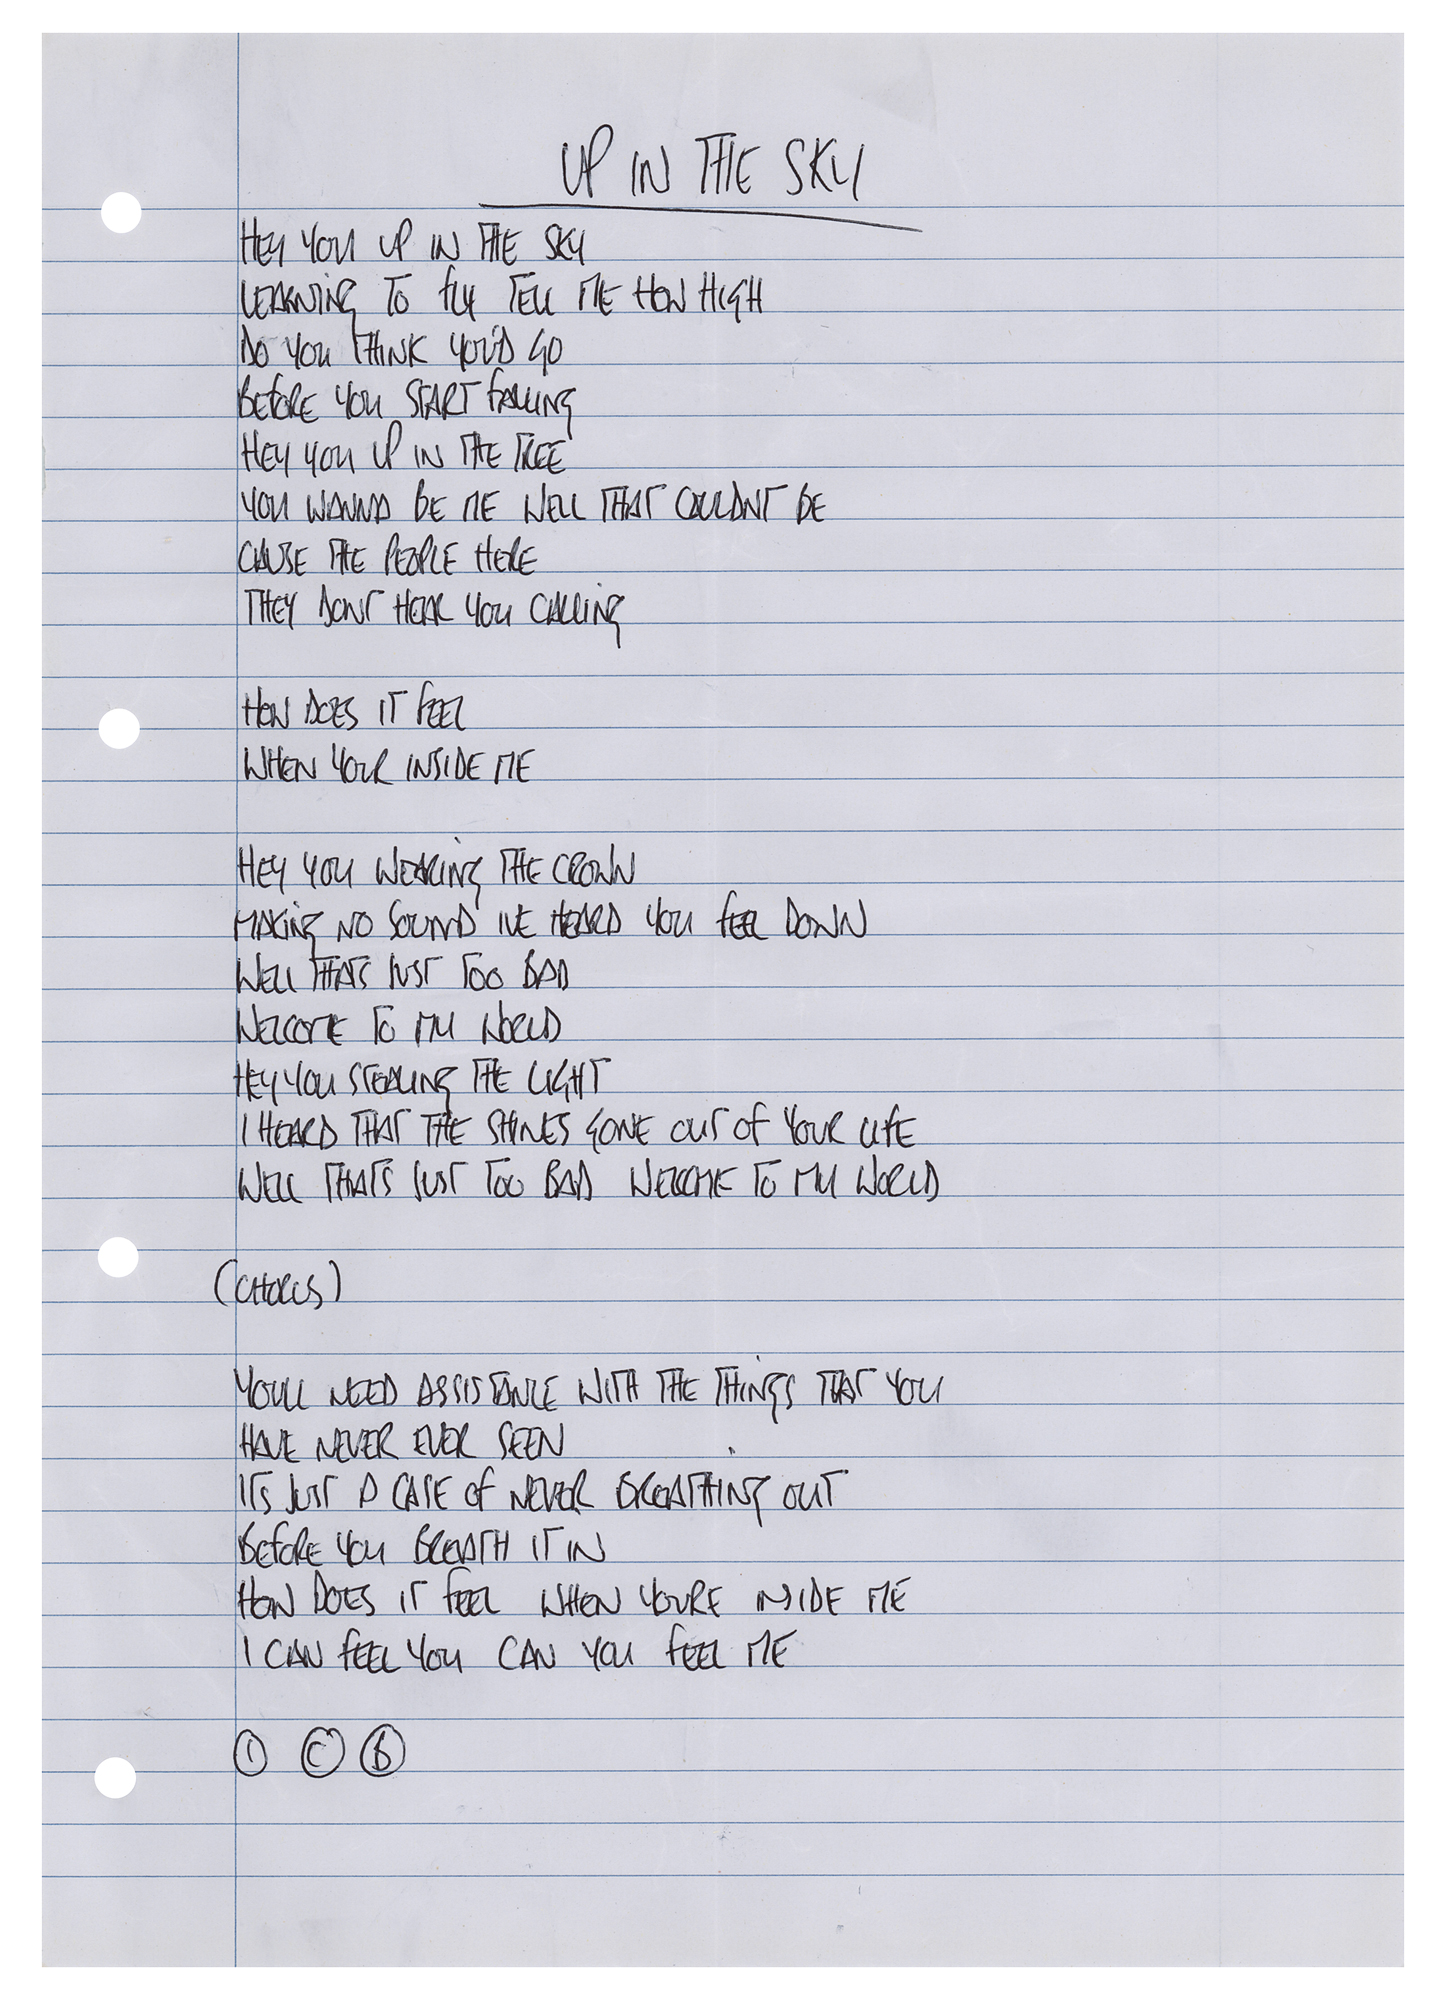 Lot #628 Oasis: Noel Gallagher Handwritten Lyrics (13) for Definitely Maybe, with CD Signed by the Gallagher Brothers - Image 10